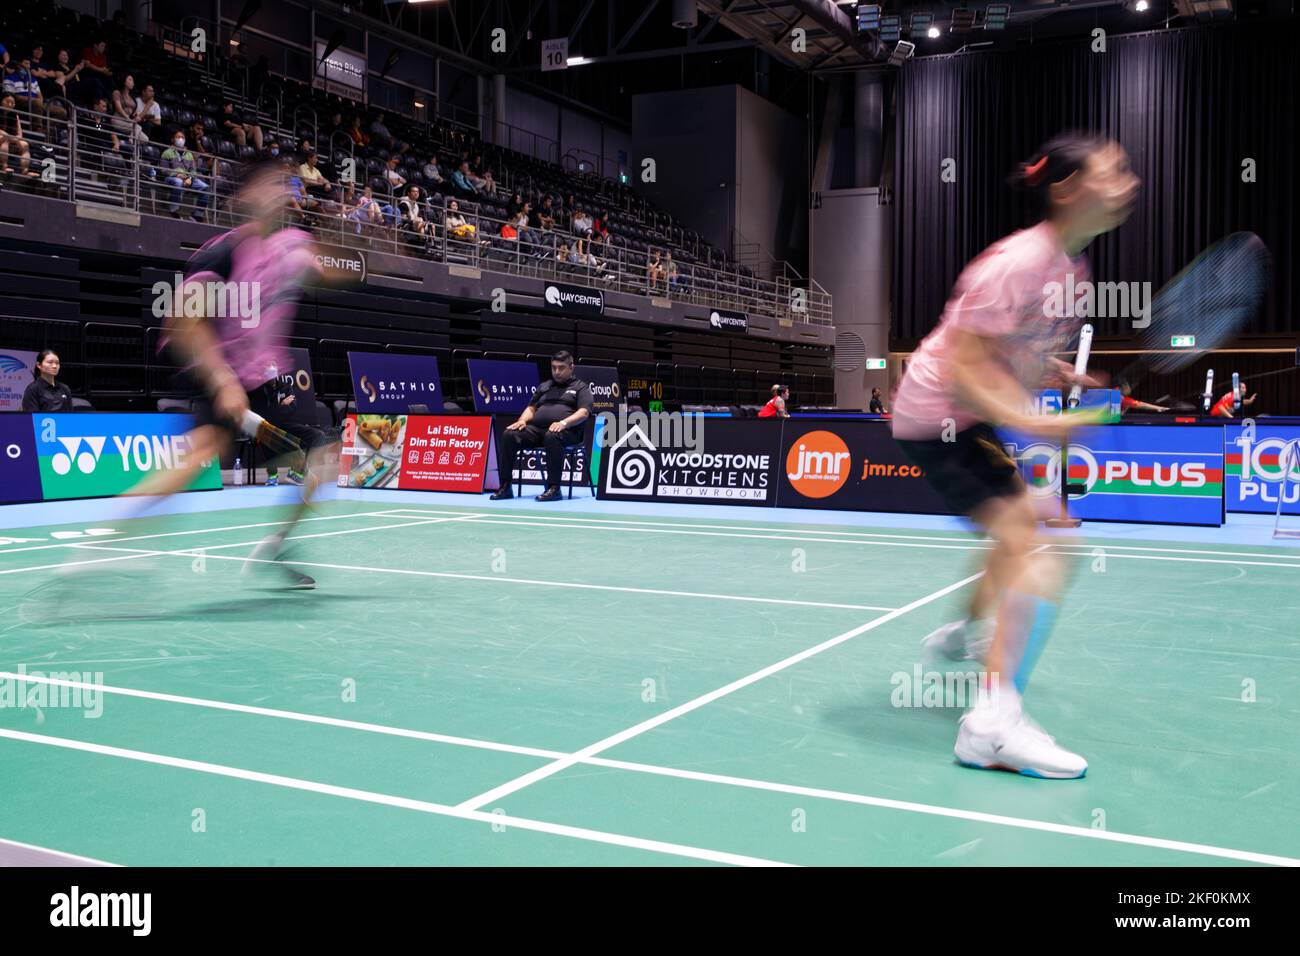 SYDNEY, AUSTRALIA - NOVEMBER 15: Long exposure photography Po-Hsuan Yang and Ling Fang Hu of Taiwan in action during day 0 of the Sathio Group Australian Open 2022 at Quaycentre on November 15, 2022 Stock Photo